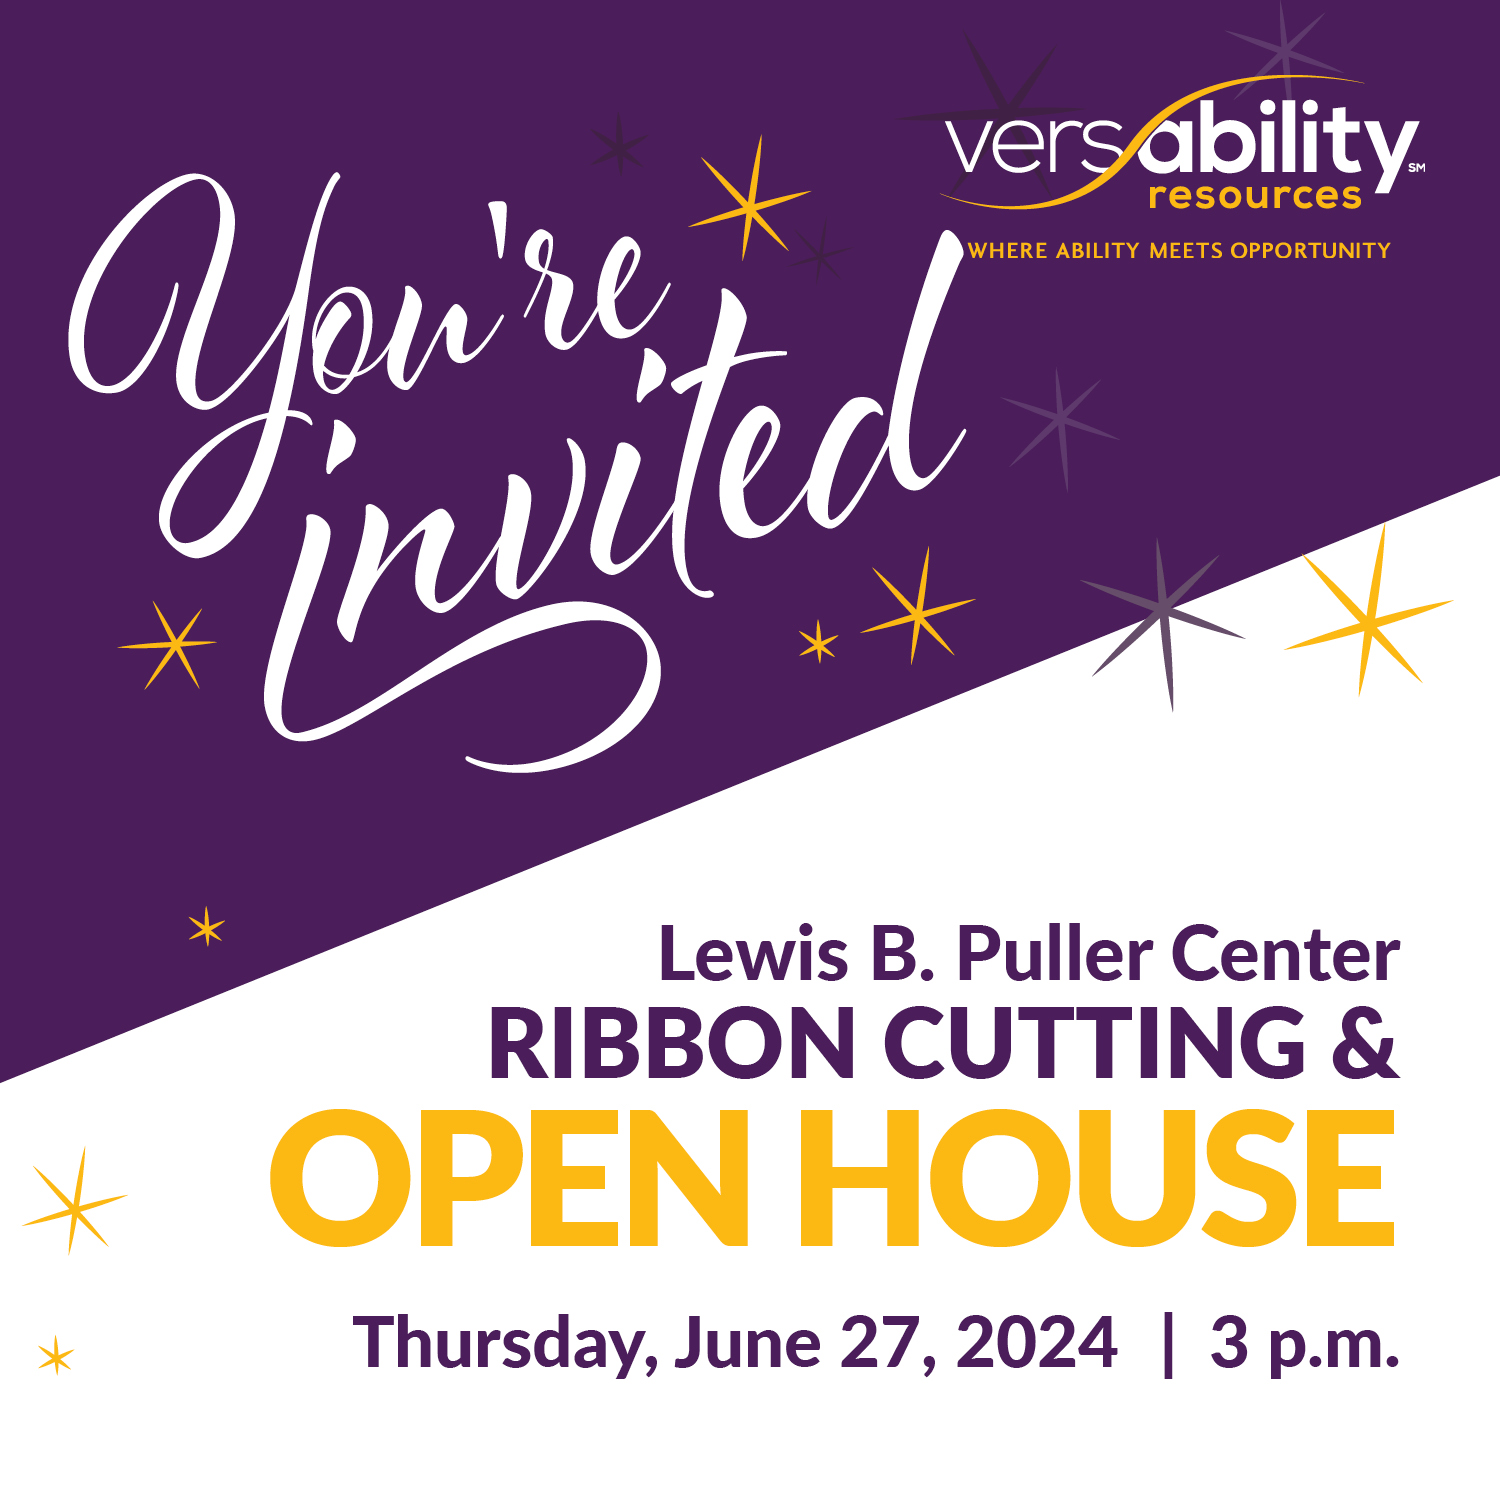 Invitation to the Pulller Center Open House Ribbon Cutting